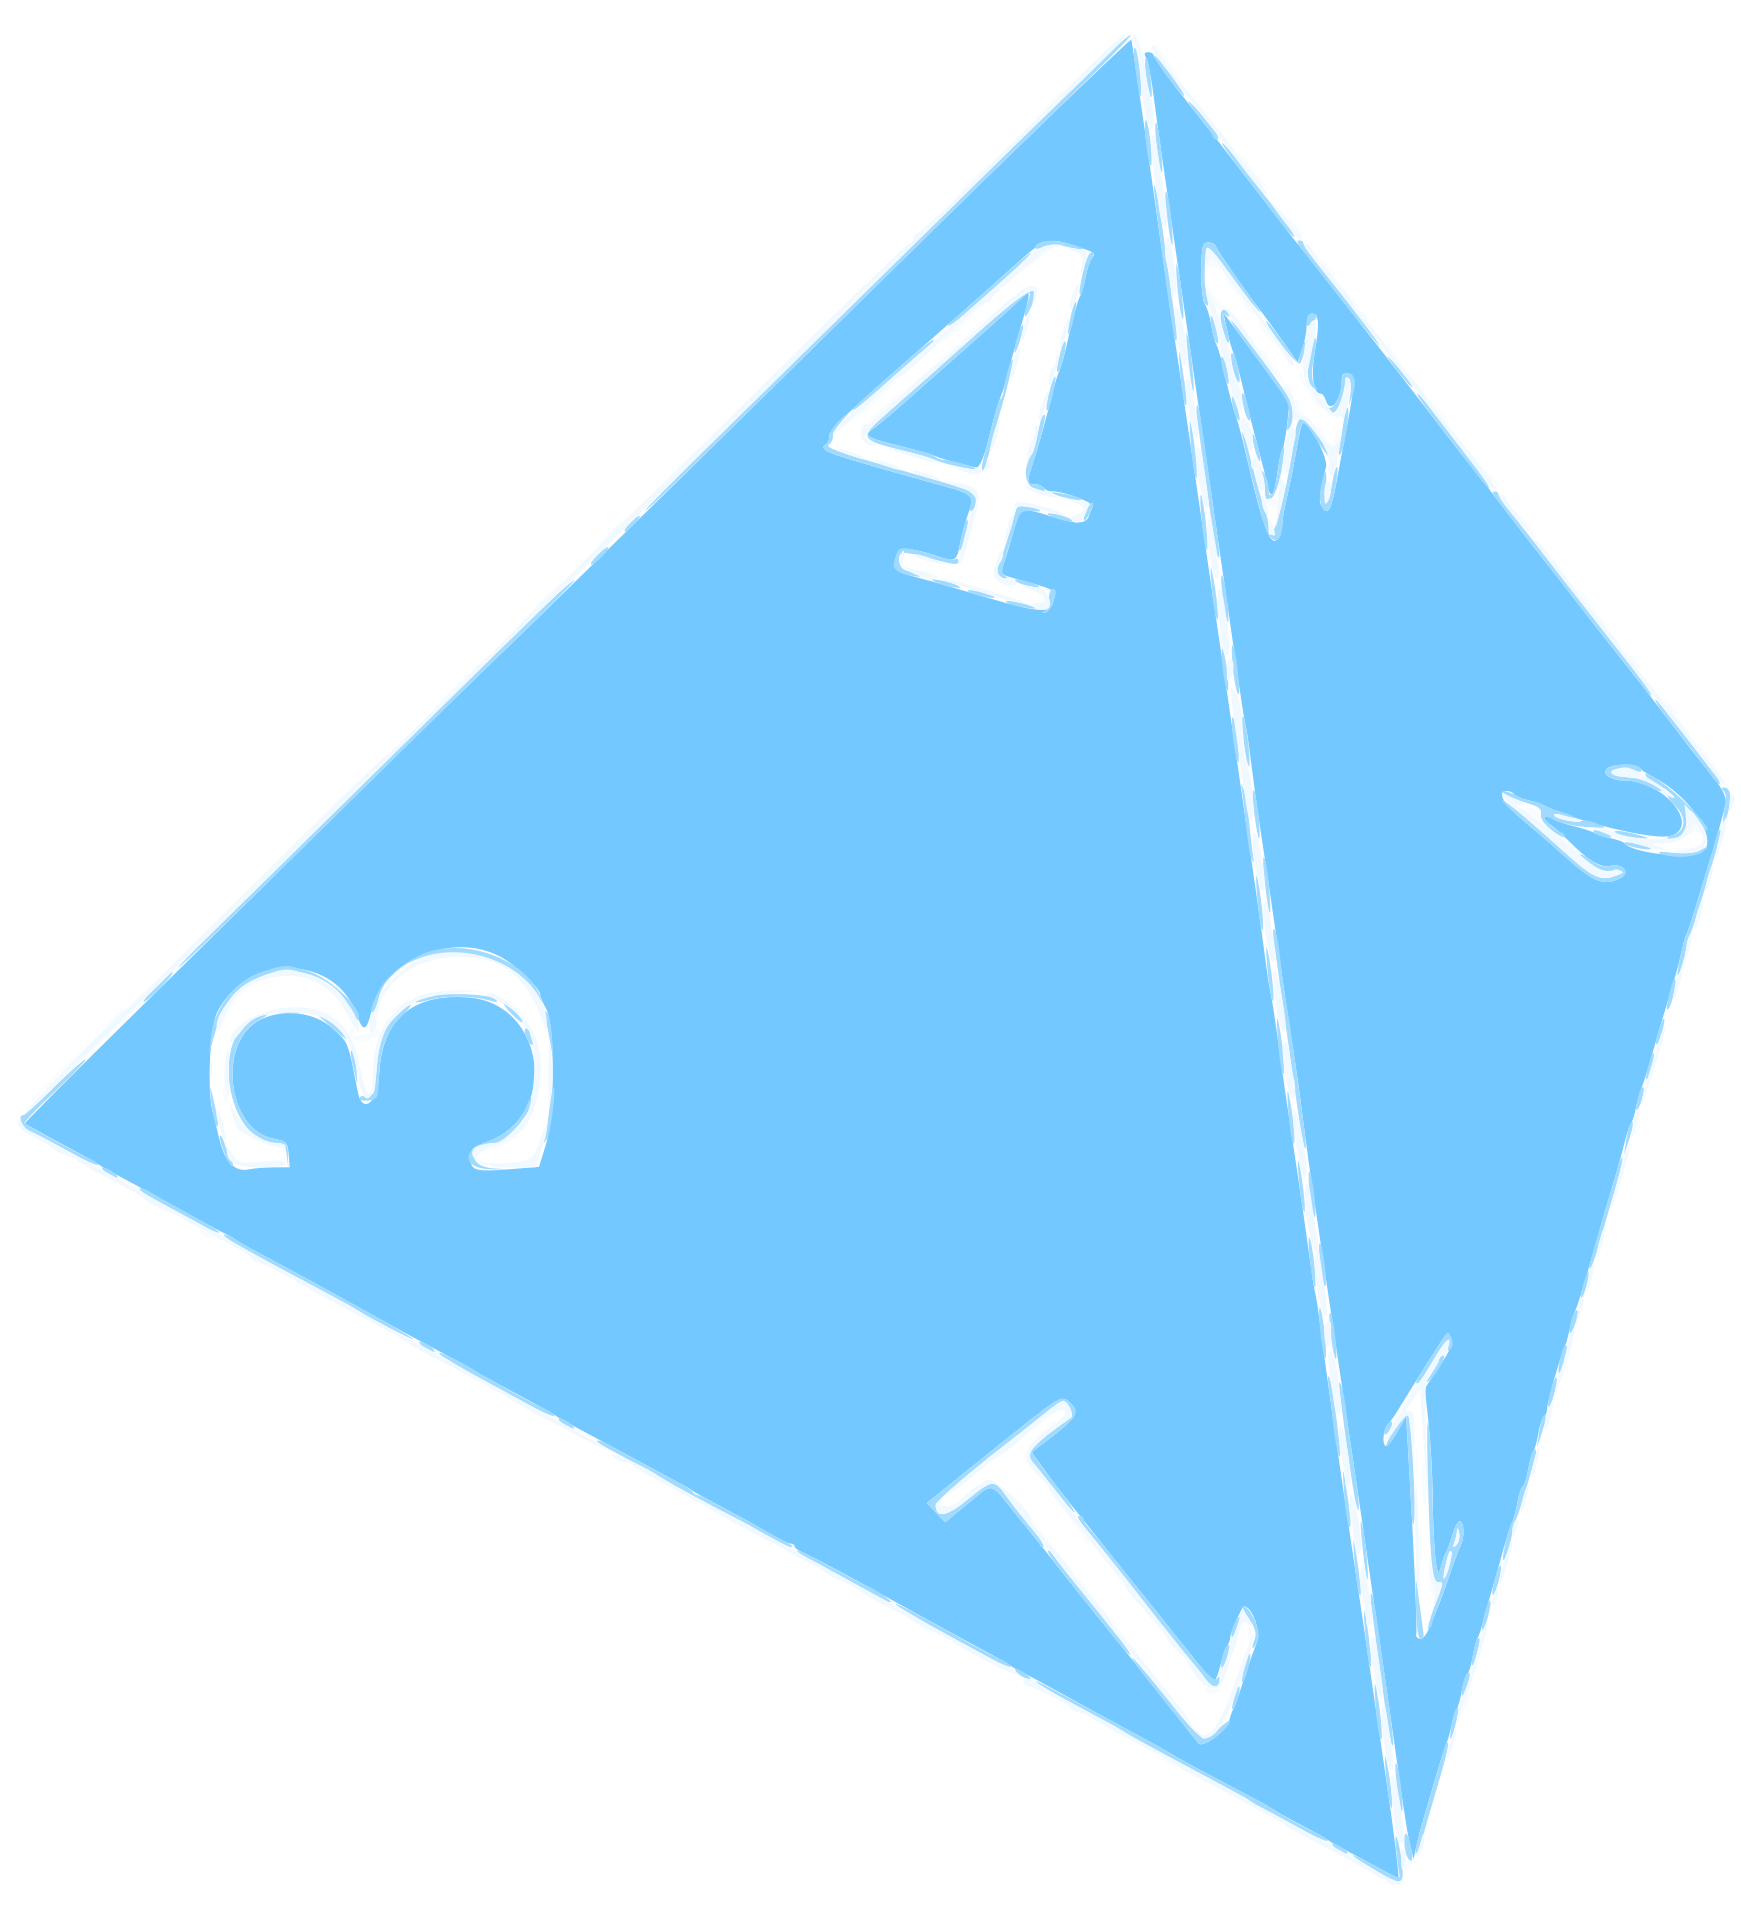 Big Image - Four Sided Dice Png (1741x1923)